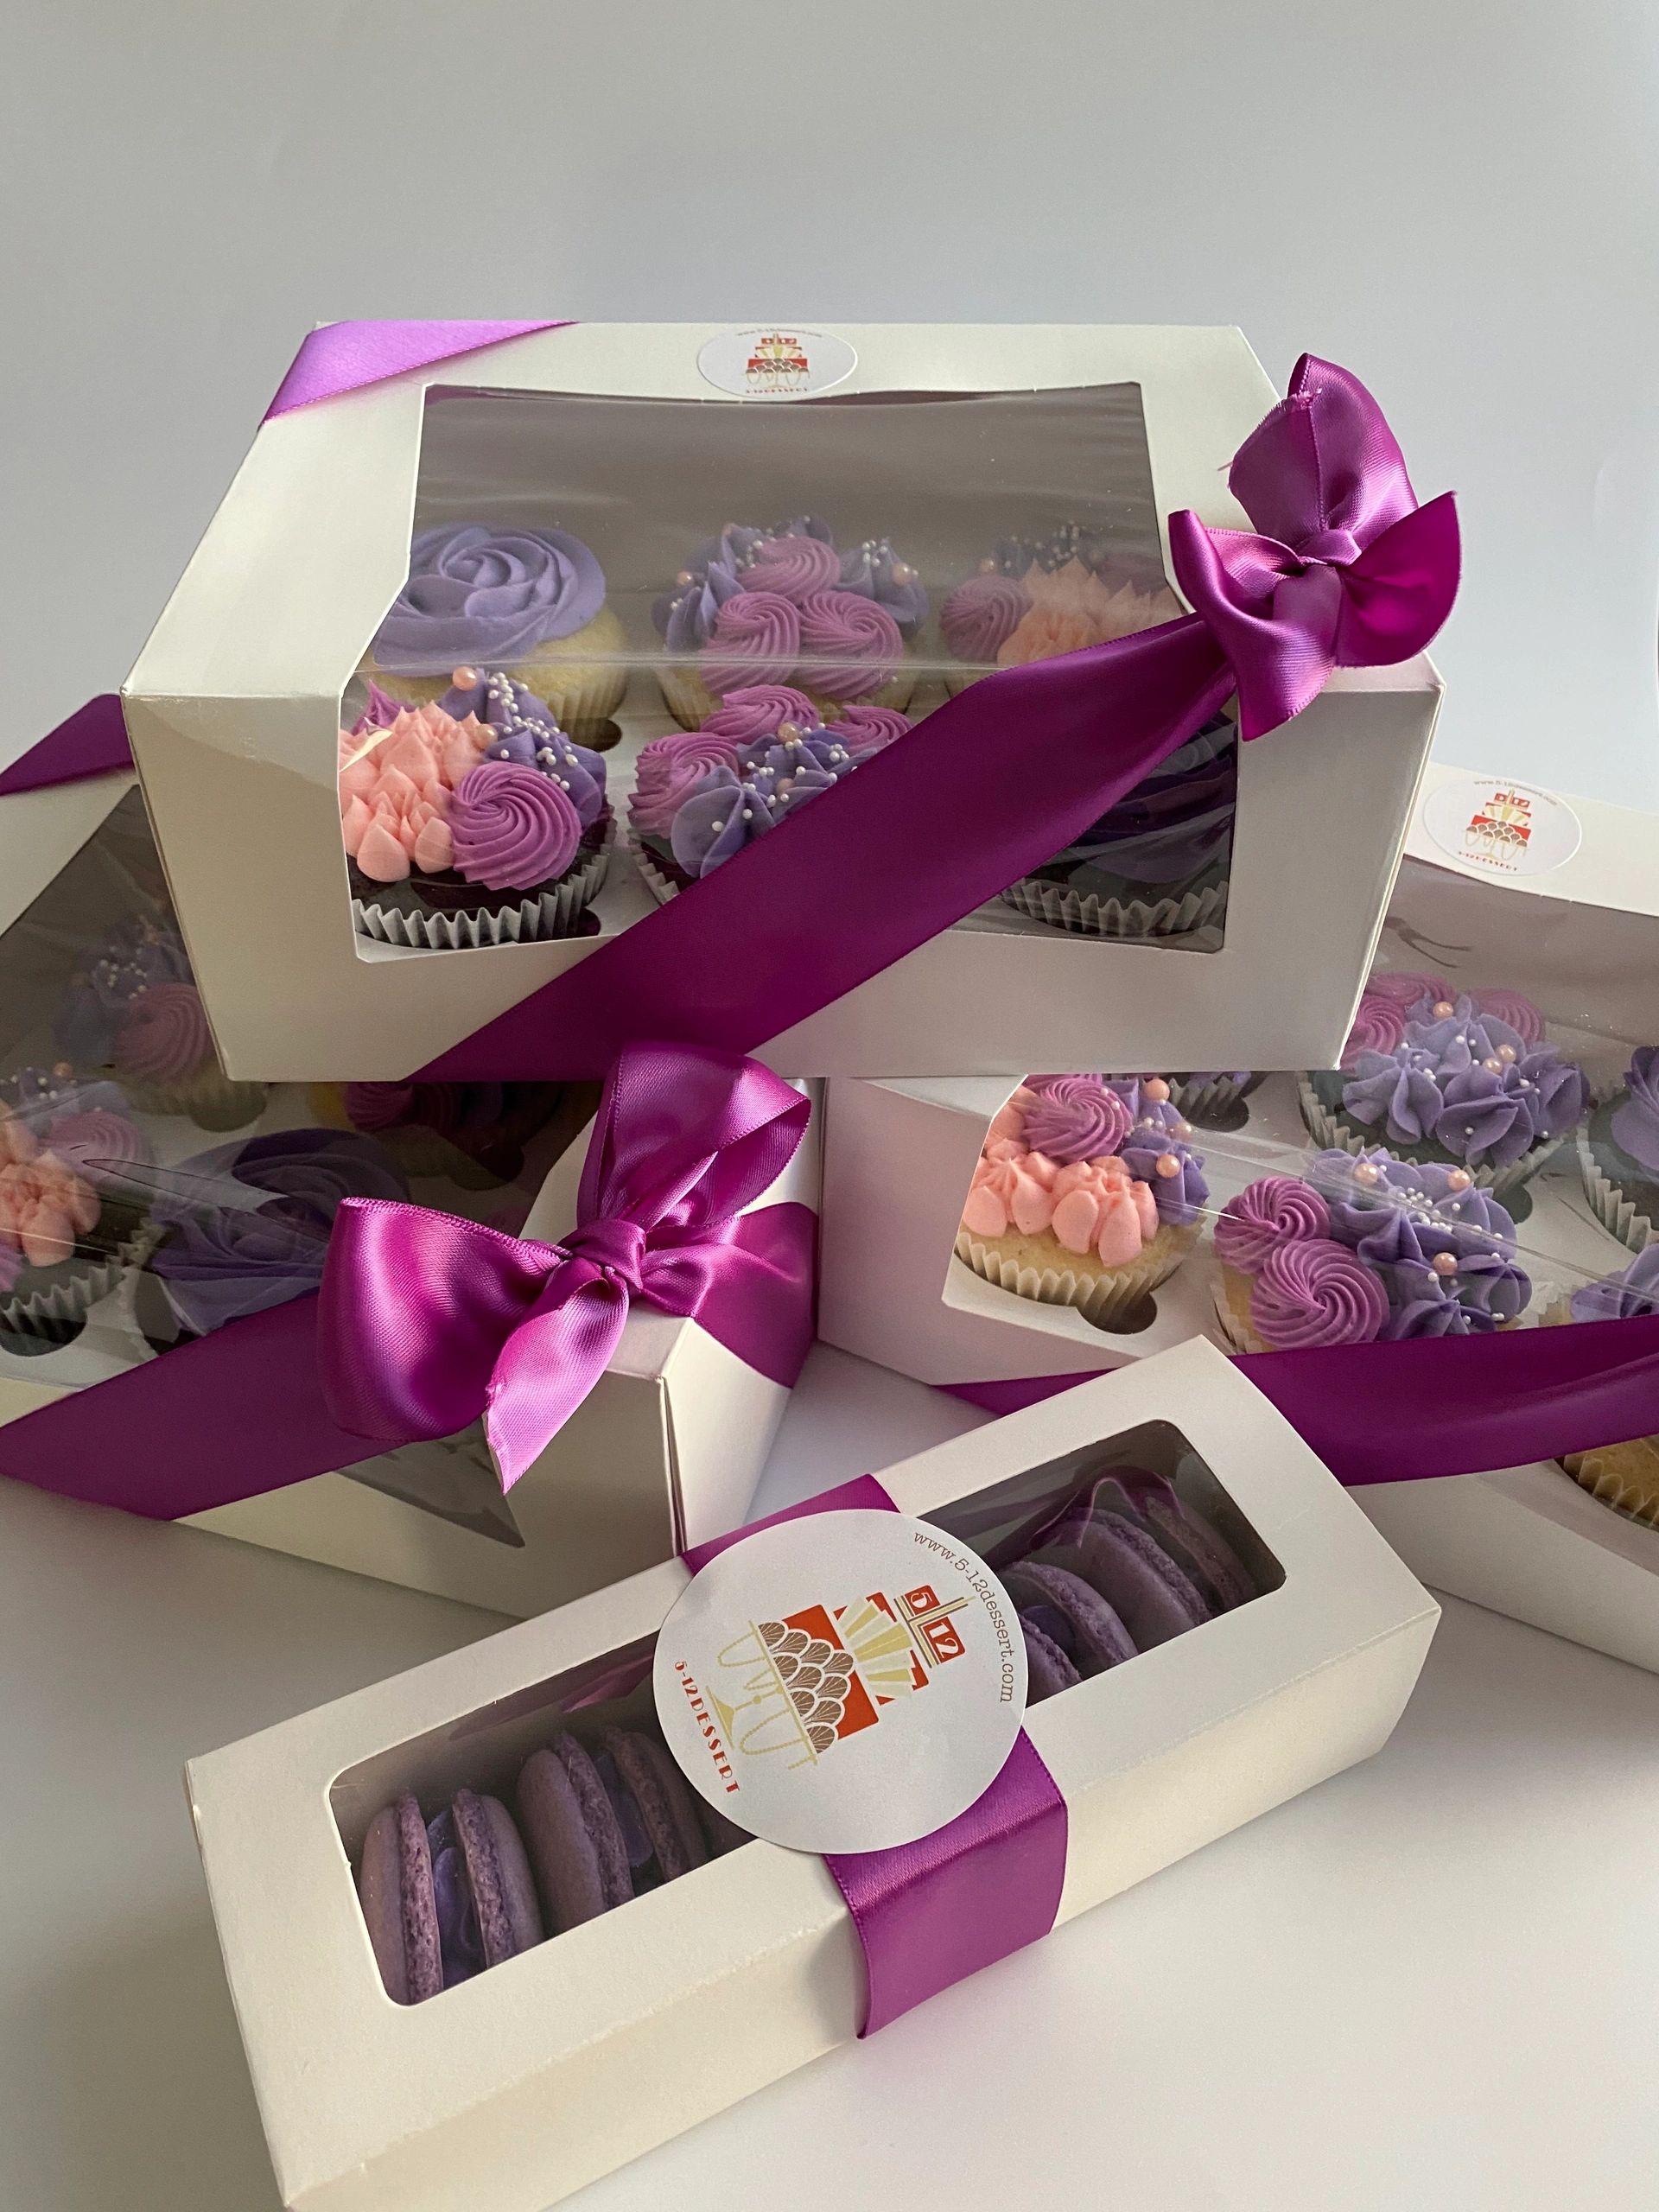 cupcakes, cupcake giftset, mother's day cupcakes, macaron giftset, floral cupcakes, mother's day gif